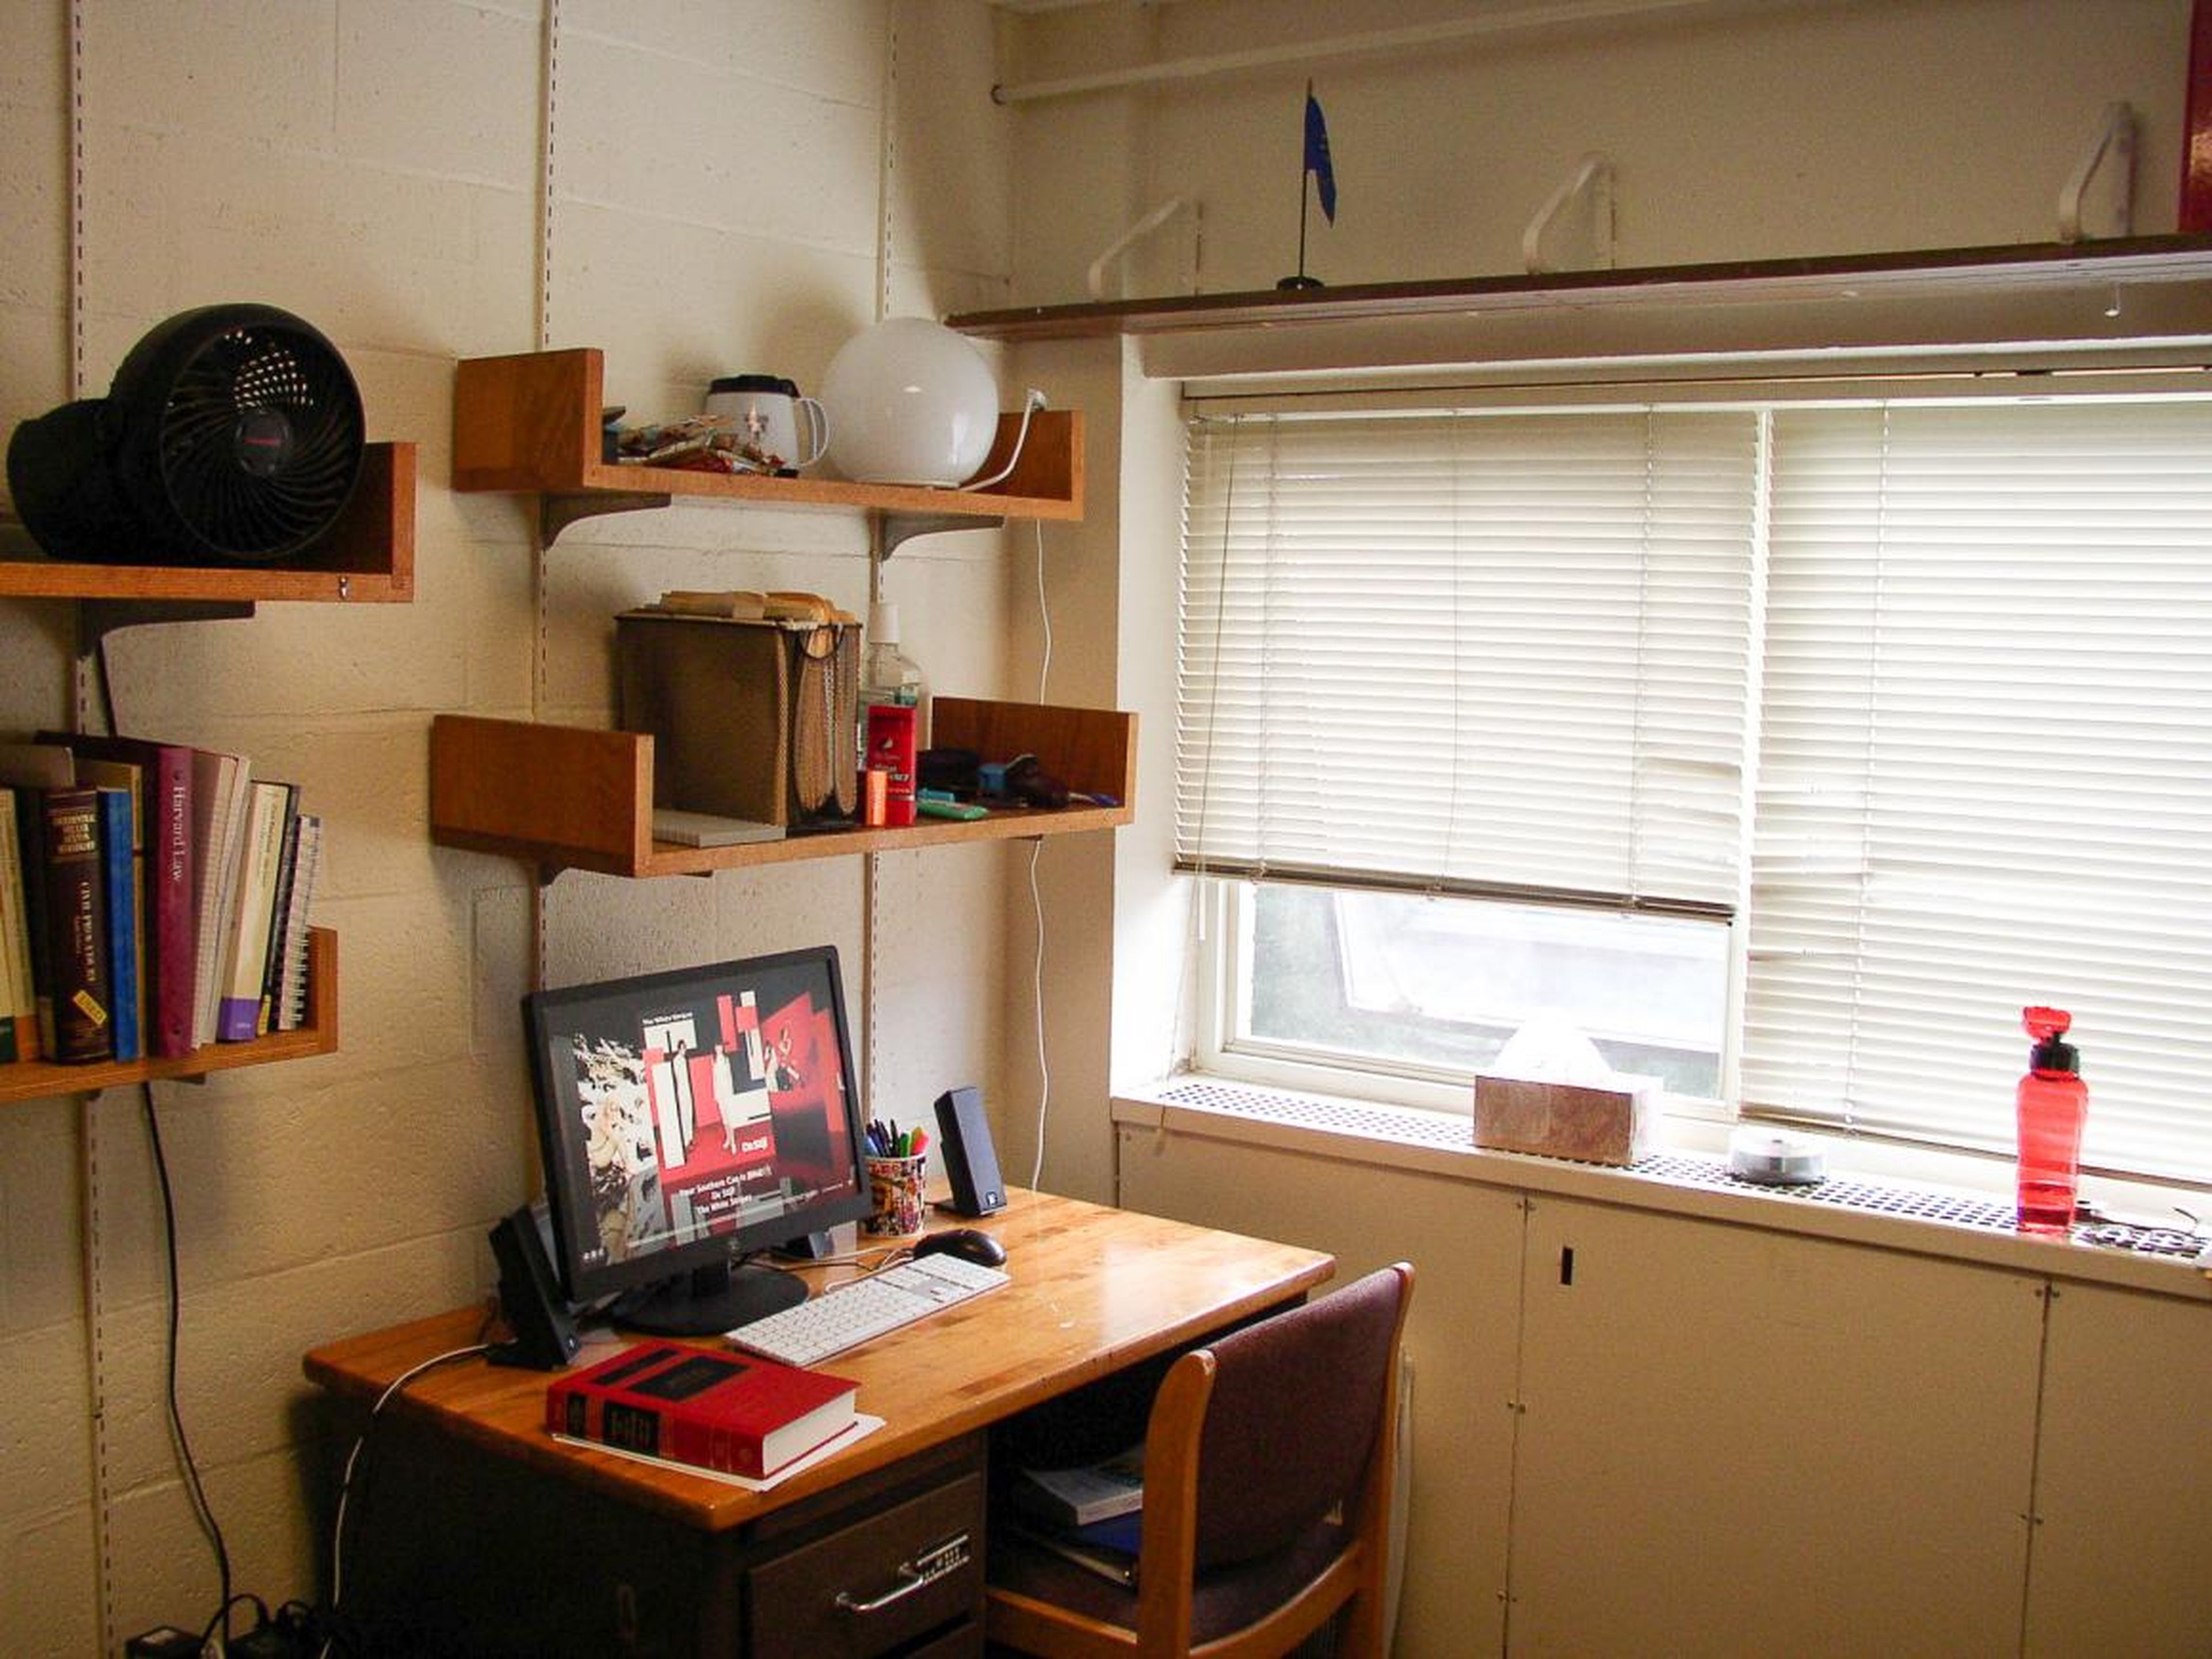 In fact, living arrangements can be so cramped that students at Harvard have been known to remove their closet doors because there's no room for them to swing open.